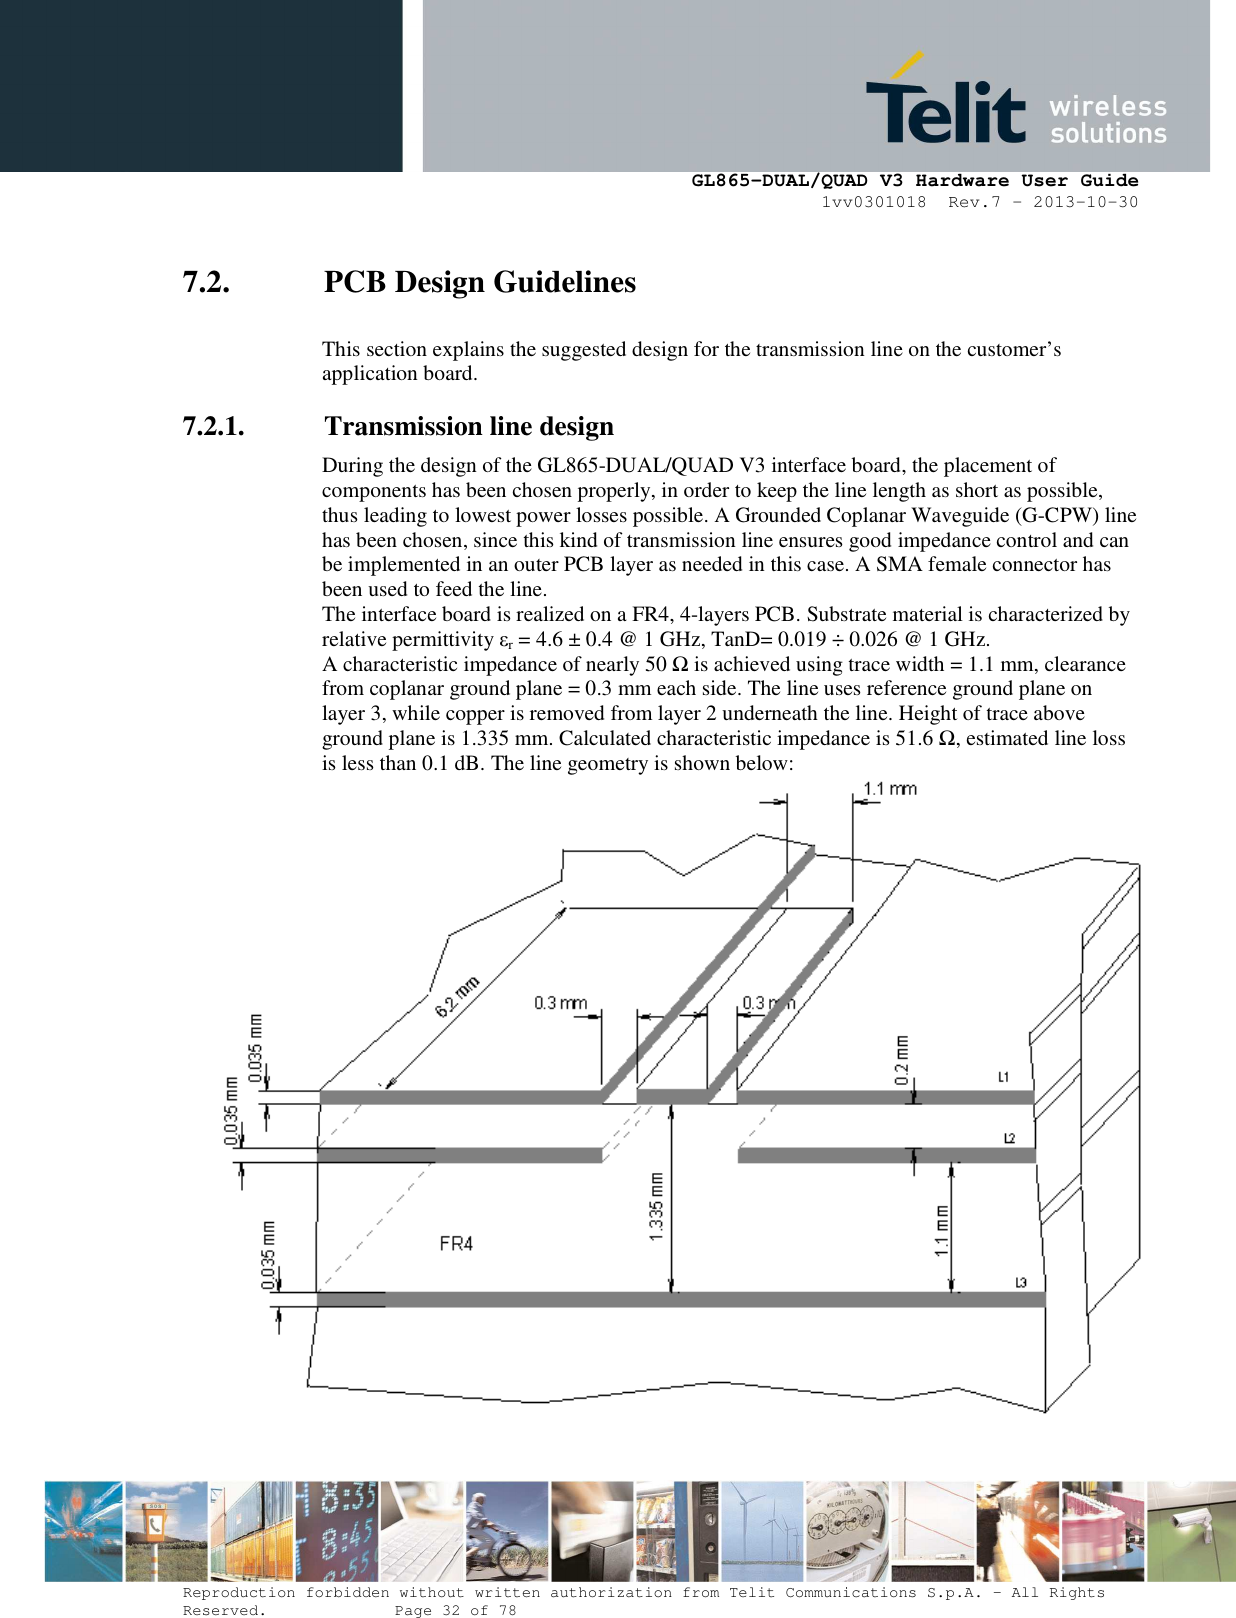      GL865-DUAL/QUAD V3 Hardware User Guide 1vv0301018  Rev.7 – 2013-10-30  Reproduction forbidden without written authorization from Telit Communications S.p.A. - All Rights Reserved.    Page 32 of 78 Mod. 0805 2011-07 Rev.2 7.2. PCB Design Guidelines  This section explains the suggested design for the transmission line on the customer’s application board. 7.2.1. Transmission line design During the design of the GL865-DUAL/QUAD V3 interface board, the placement of components has been chosen properly, in order to keep the line length as short as possible, thus leading to lowest power losses possible. A Grounded Coplanar Waveguide (G-CPW) line has been chosen, since this kind of transmission line ensures good impedance control and can be implemented in an outer PCB layer as needed in this case. A SMA female connector has been used to feed the line. The interface board is realized on a FR4, 4-layers PCB. Substrate material is characterized by relative permittivity εr = 4.6 ± 0.4 @ 1 GHz, TanD= 0.019 ÷ 0.026 @ 1 GHz. A characteristic impedance of nearly 50 Ω is achieved using trace width = 1.1 mm, clearance from coplanar ground plane = 0.3 mm each side. The line uses reference ground plane on layer 3, while copper is removed from layer 2 underneath the line. Height of trace above ground plane is 1.335 mm. Calculated characteristic impedance is 51.6 Ω, estimated line loss is less than 0.1 dB. The line geometry is shown below:  